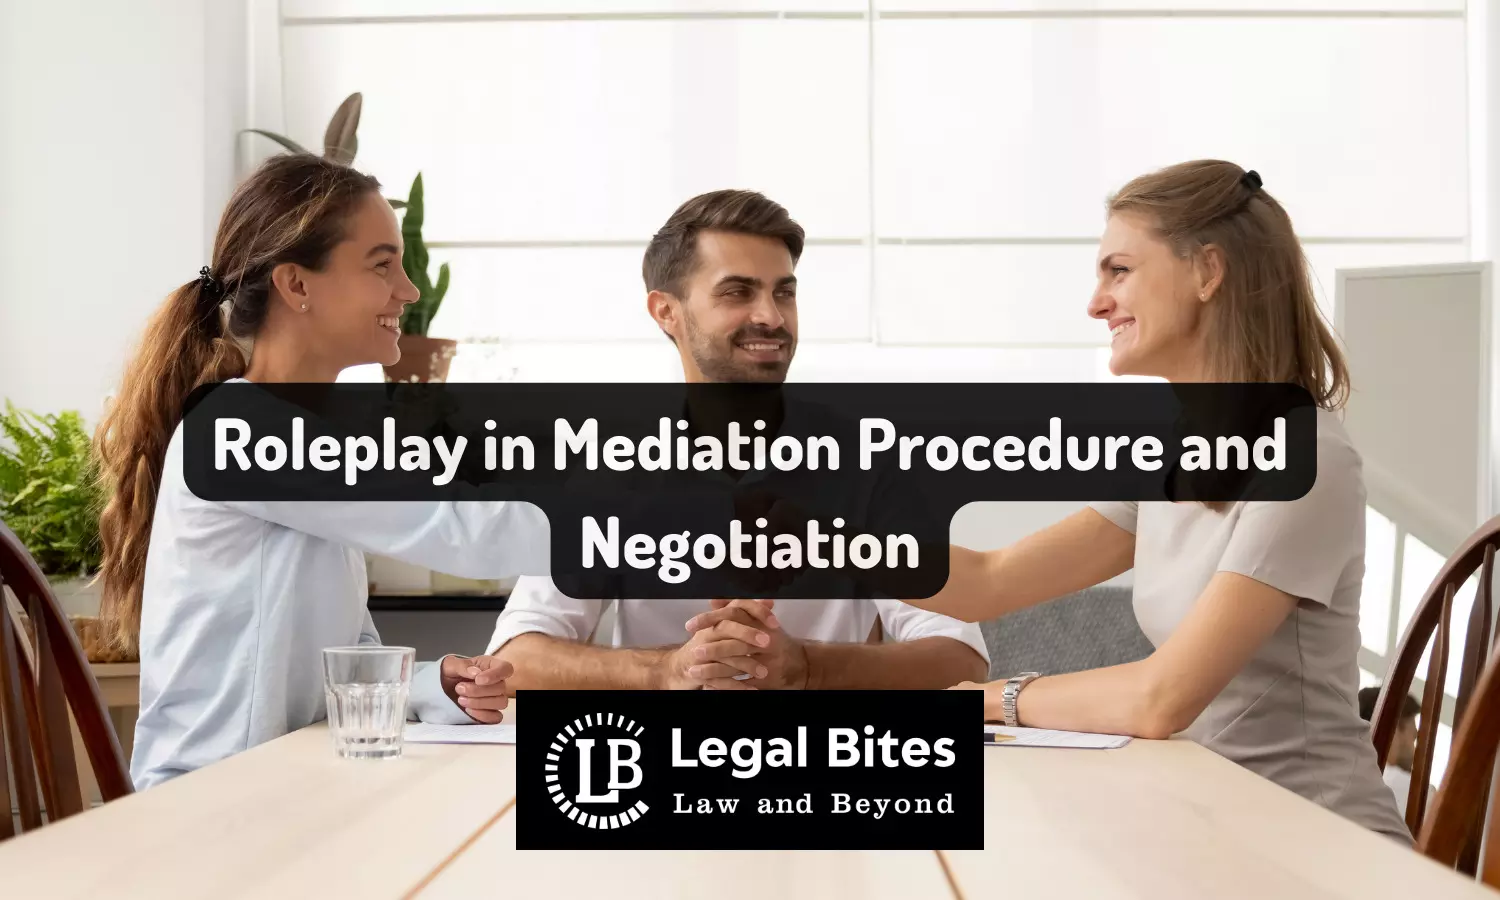 Roleplay in Mediation Procedure and Negotiation